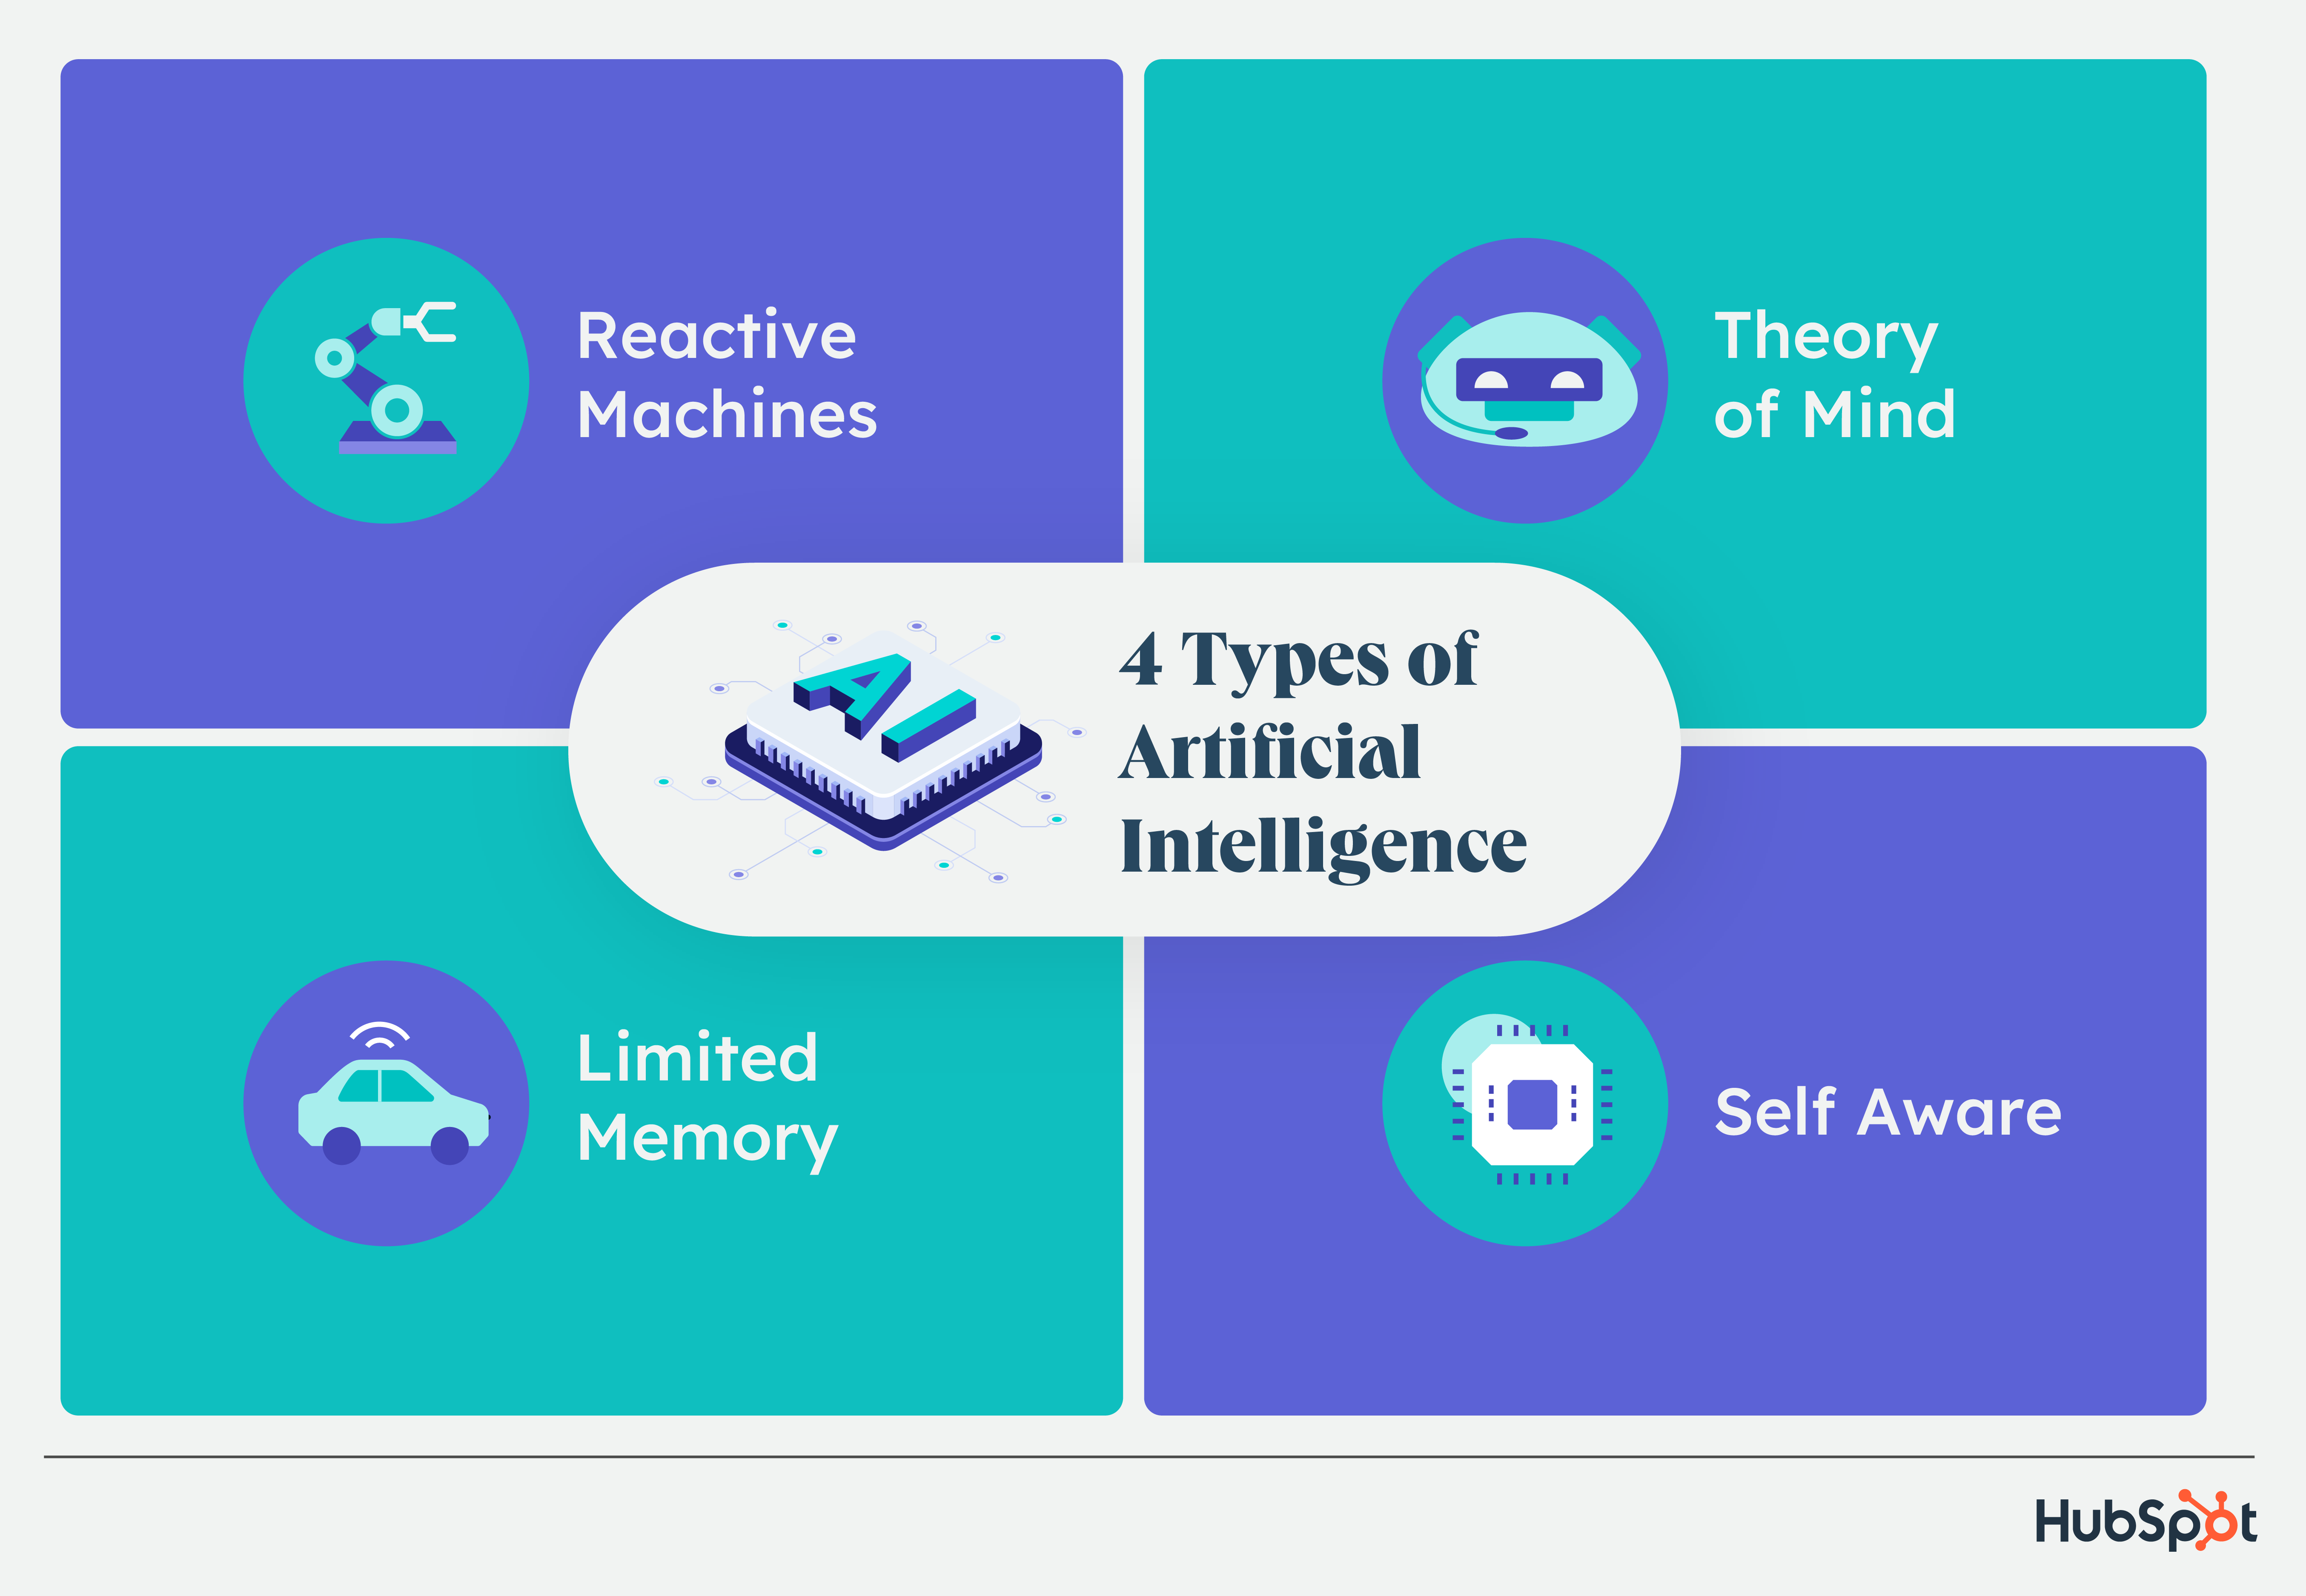 4 types of AI: reactive machines, limited memory, theory of mind and self aware